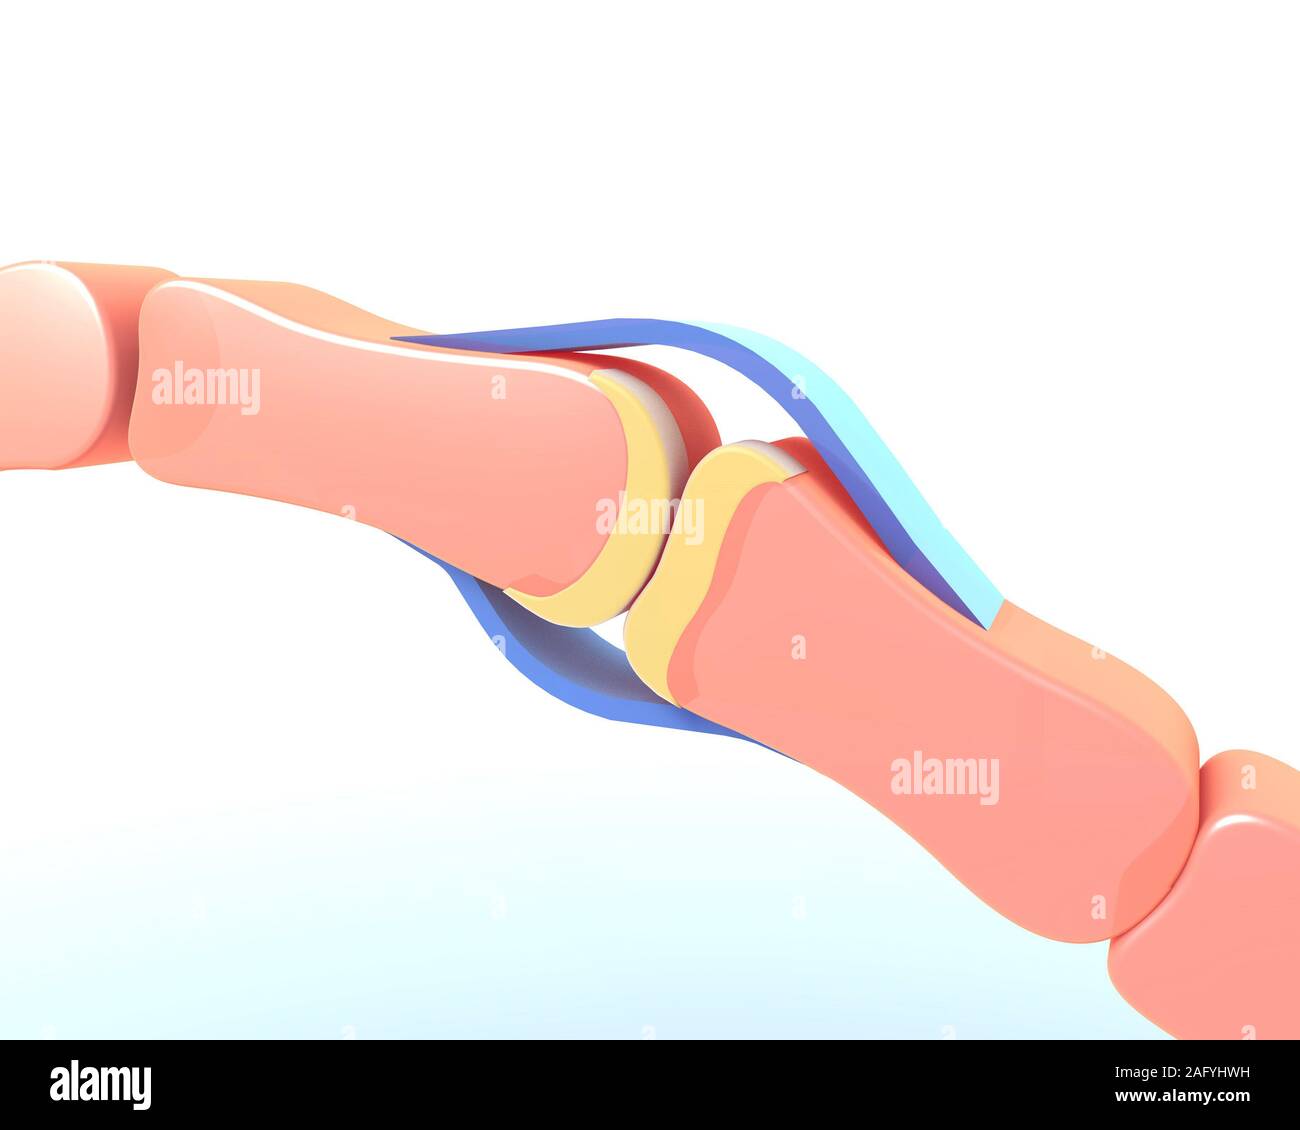 3d illustration of the synovial joint of the bone of a hand. Schematic and symbolic graphic representation. Stock Photo